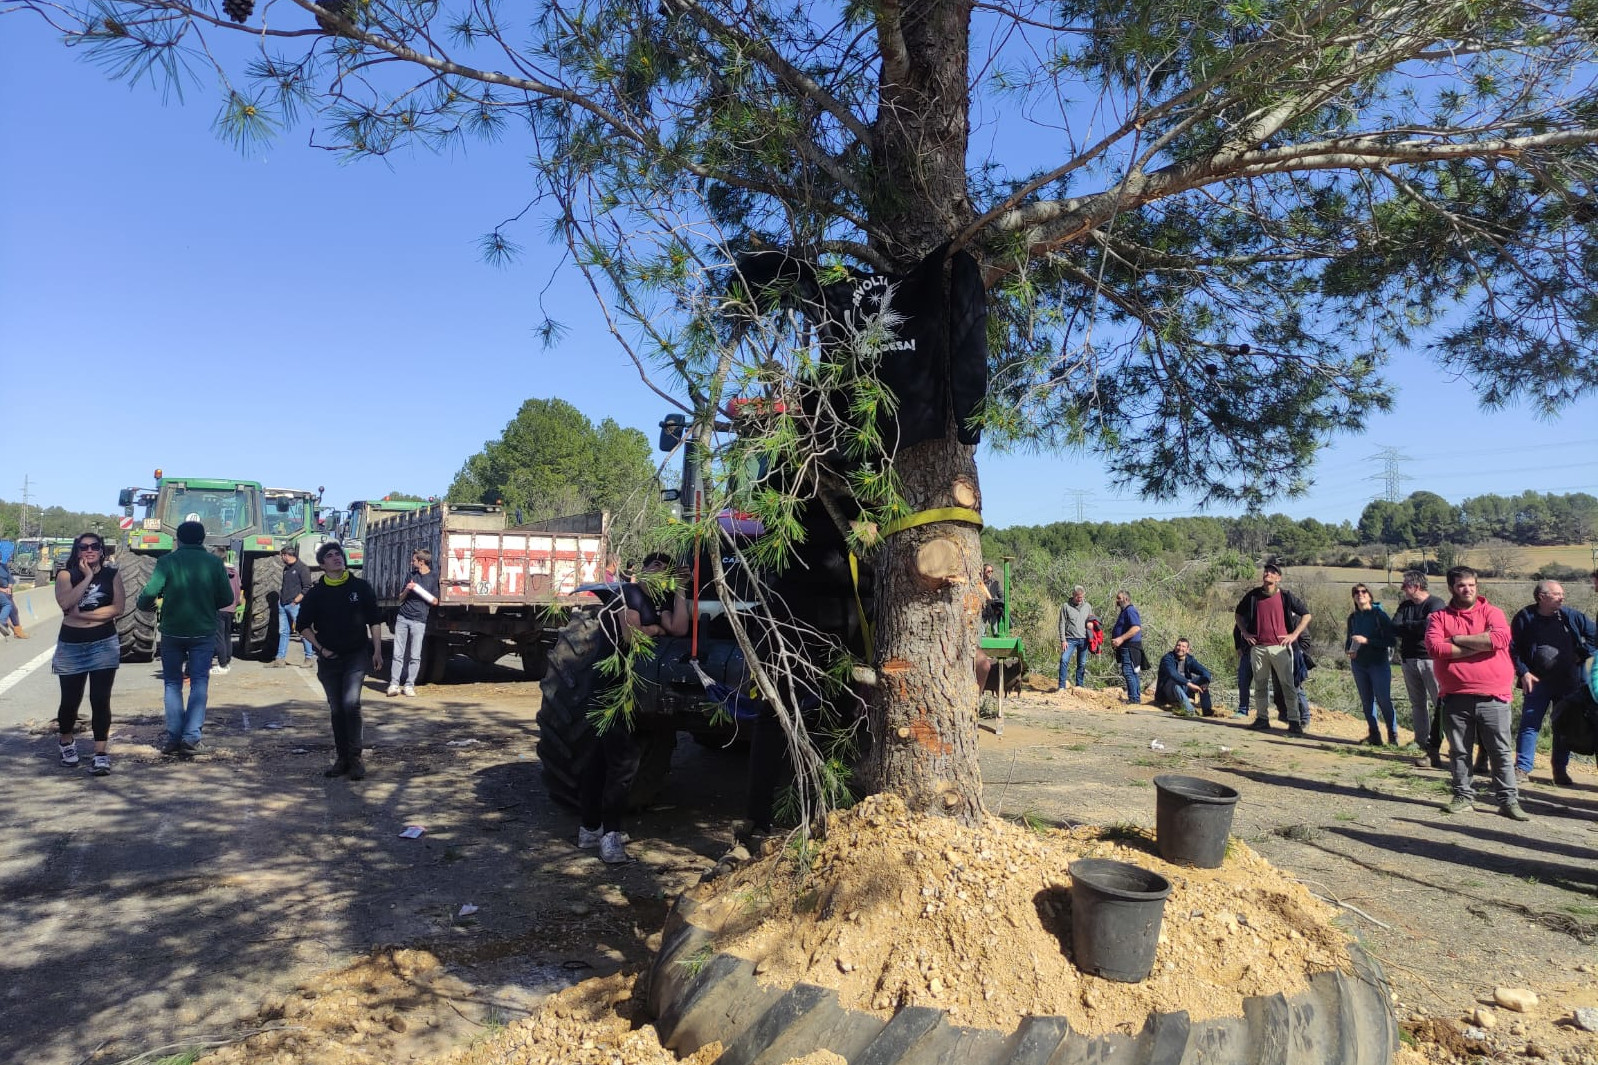 Farmers planted a ten-meter pine tree in the middle of the AP-7 highway